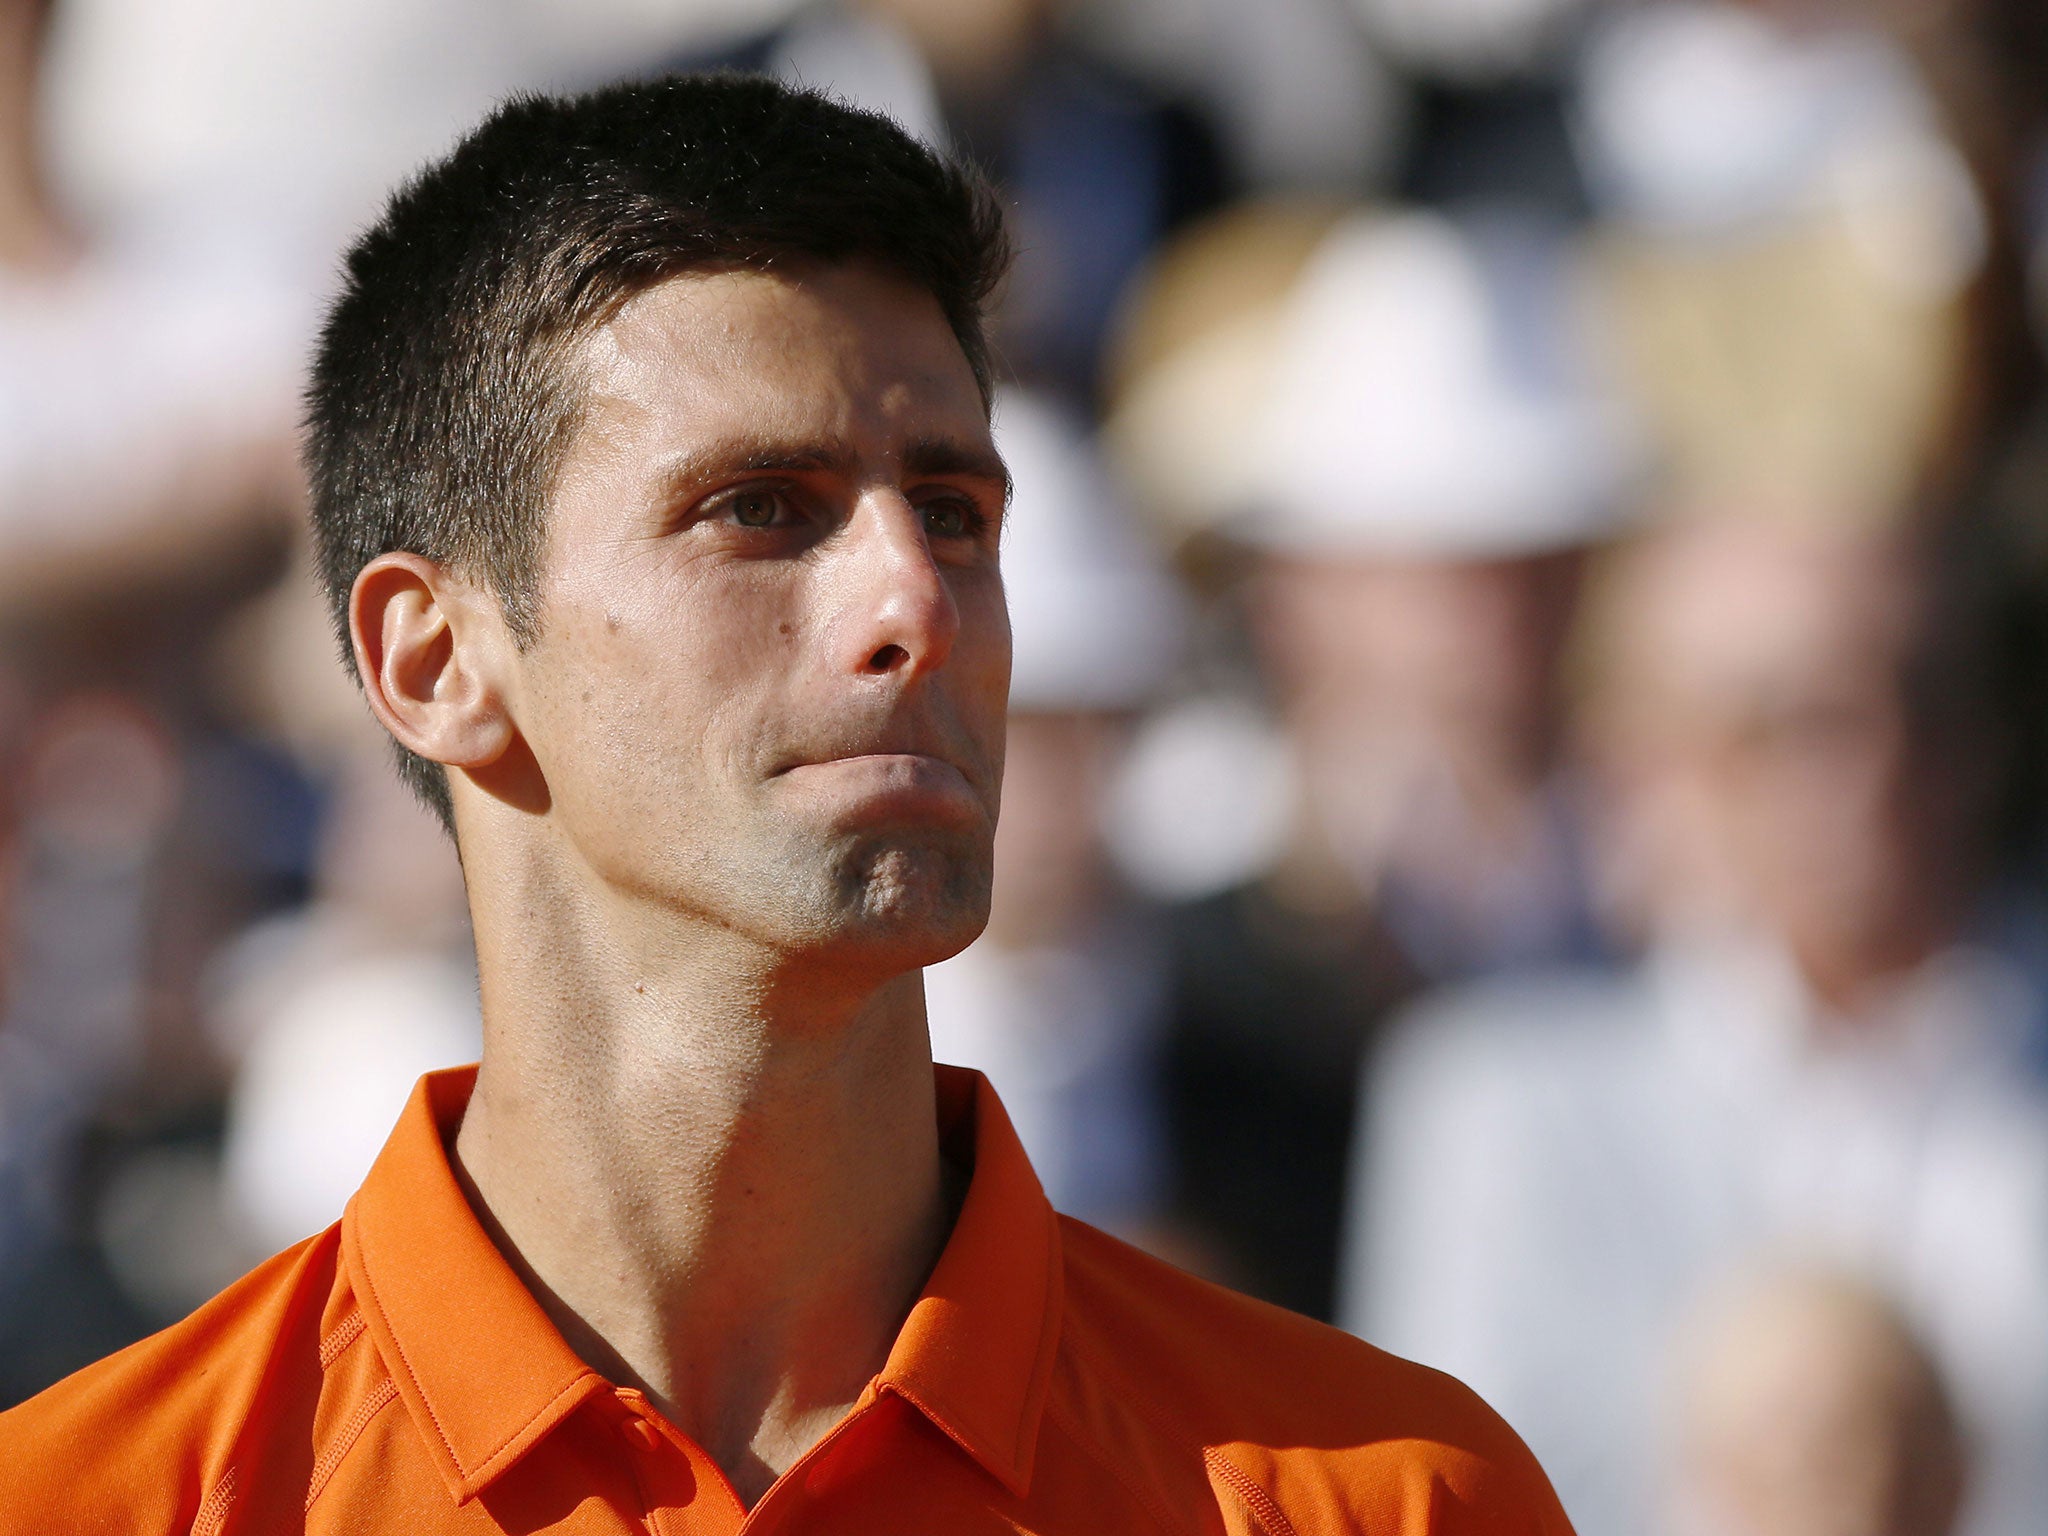 Novak Djokovic was nearly brought to tears after an ovation from the crowd despite defeat